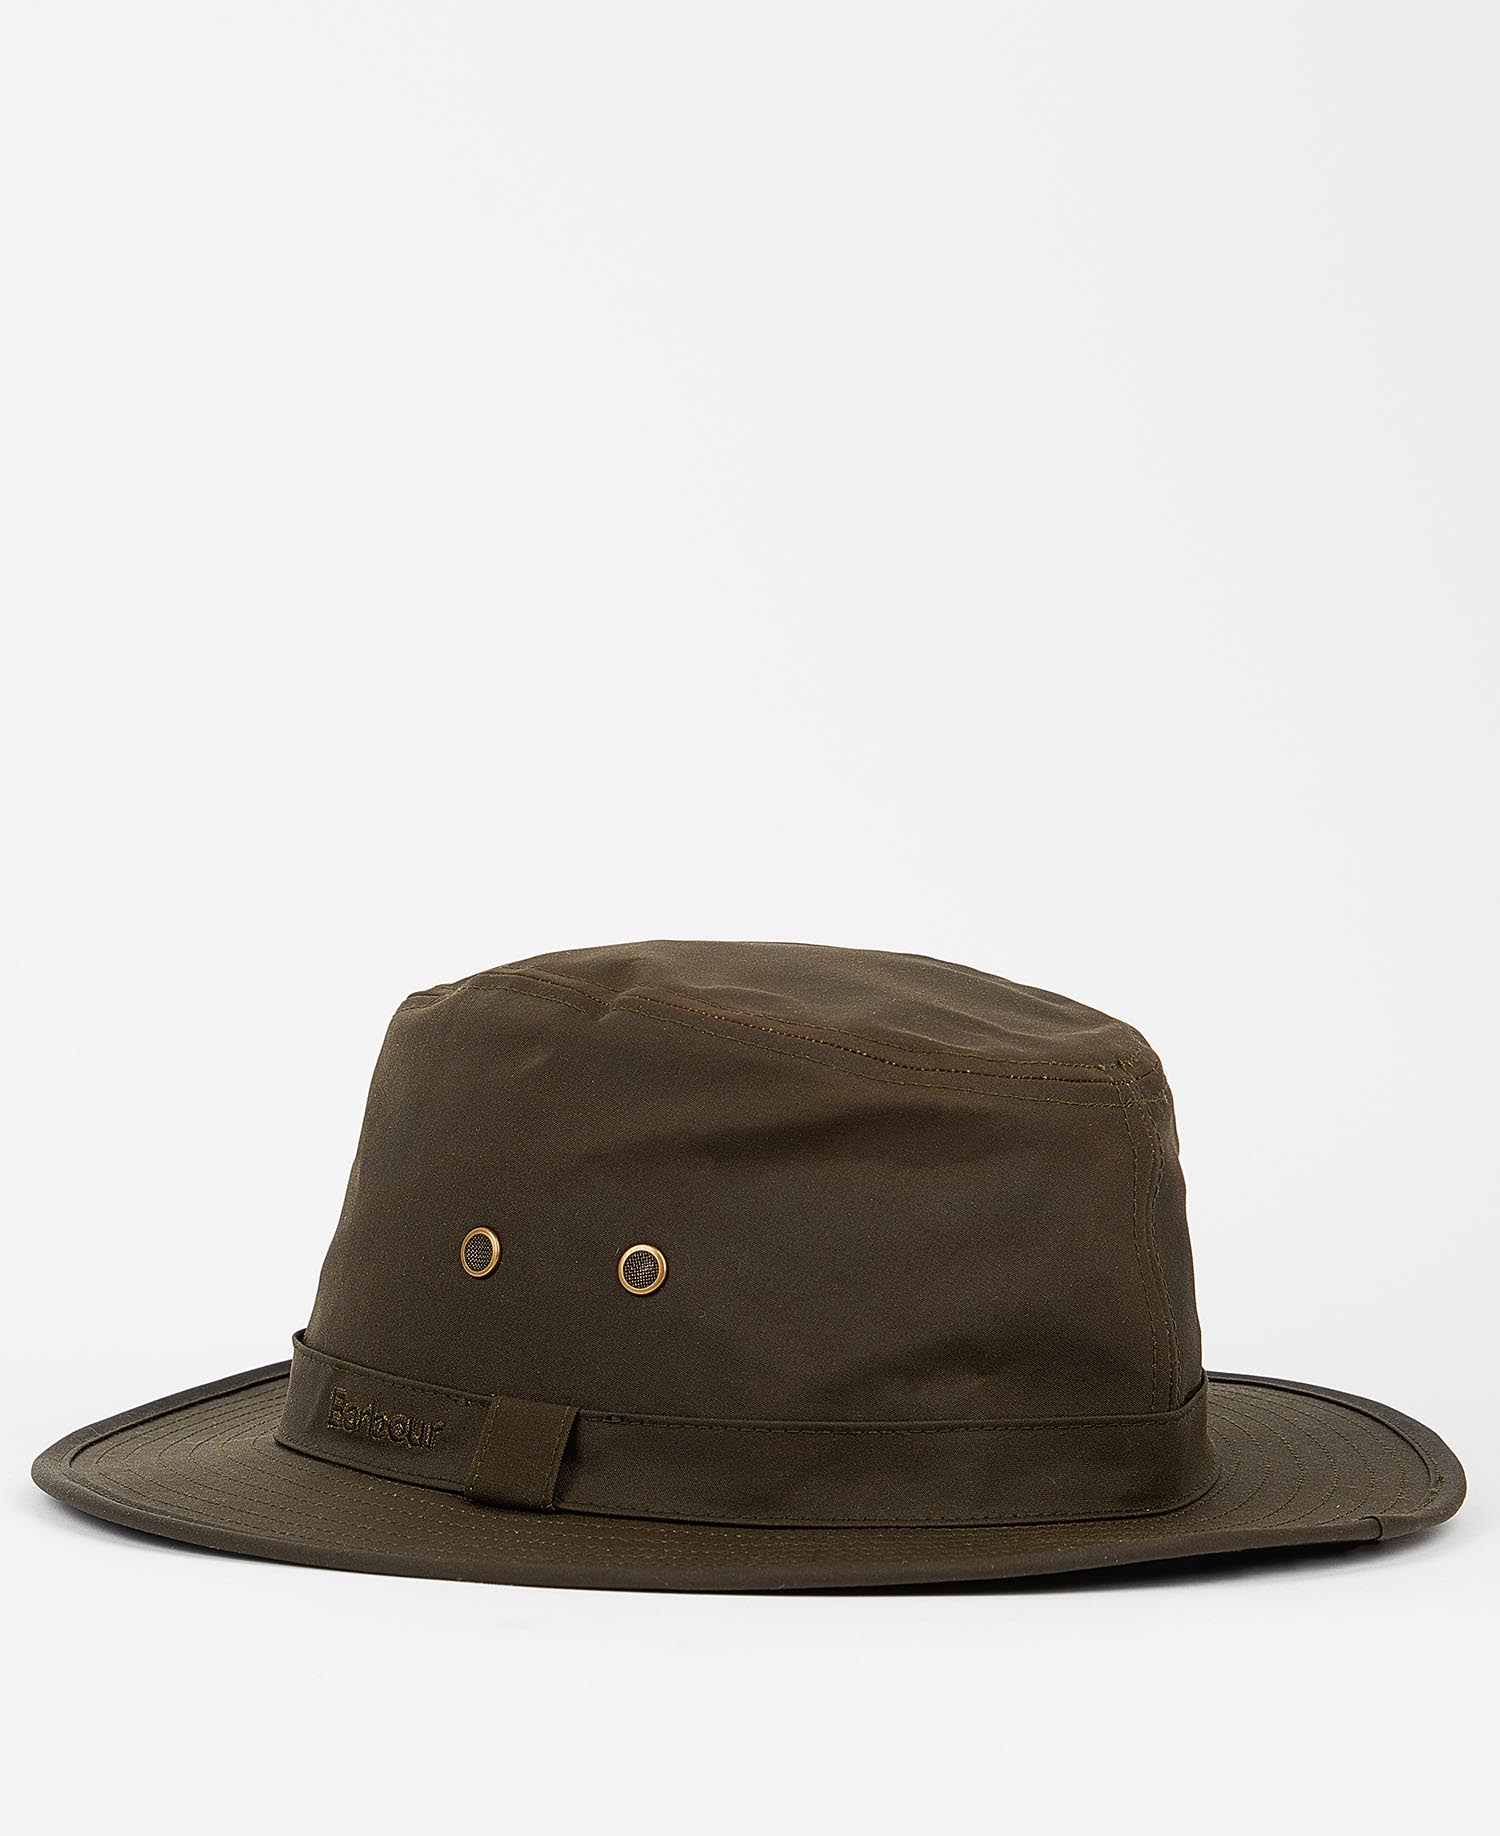 Shop the Barbour Dawson Wax Safari Hat here at Barbour. | Barbour ...